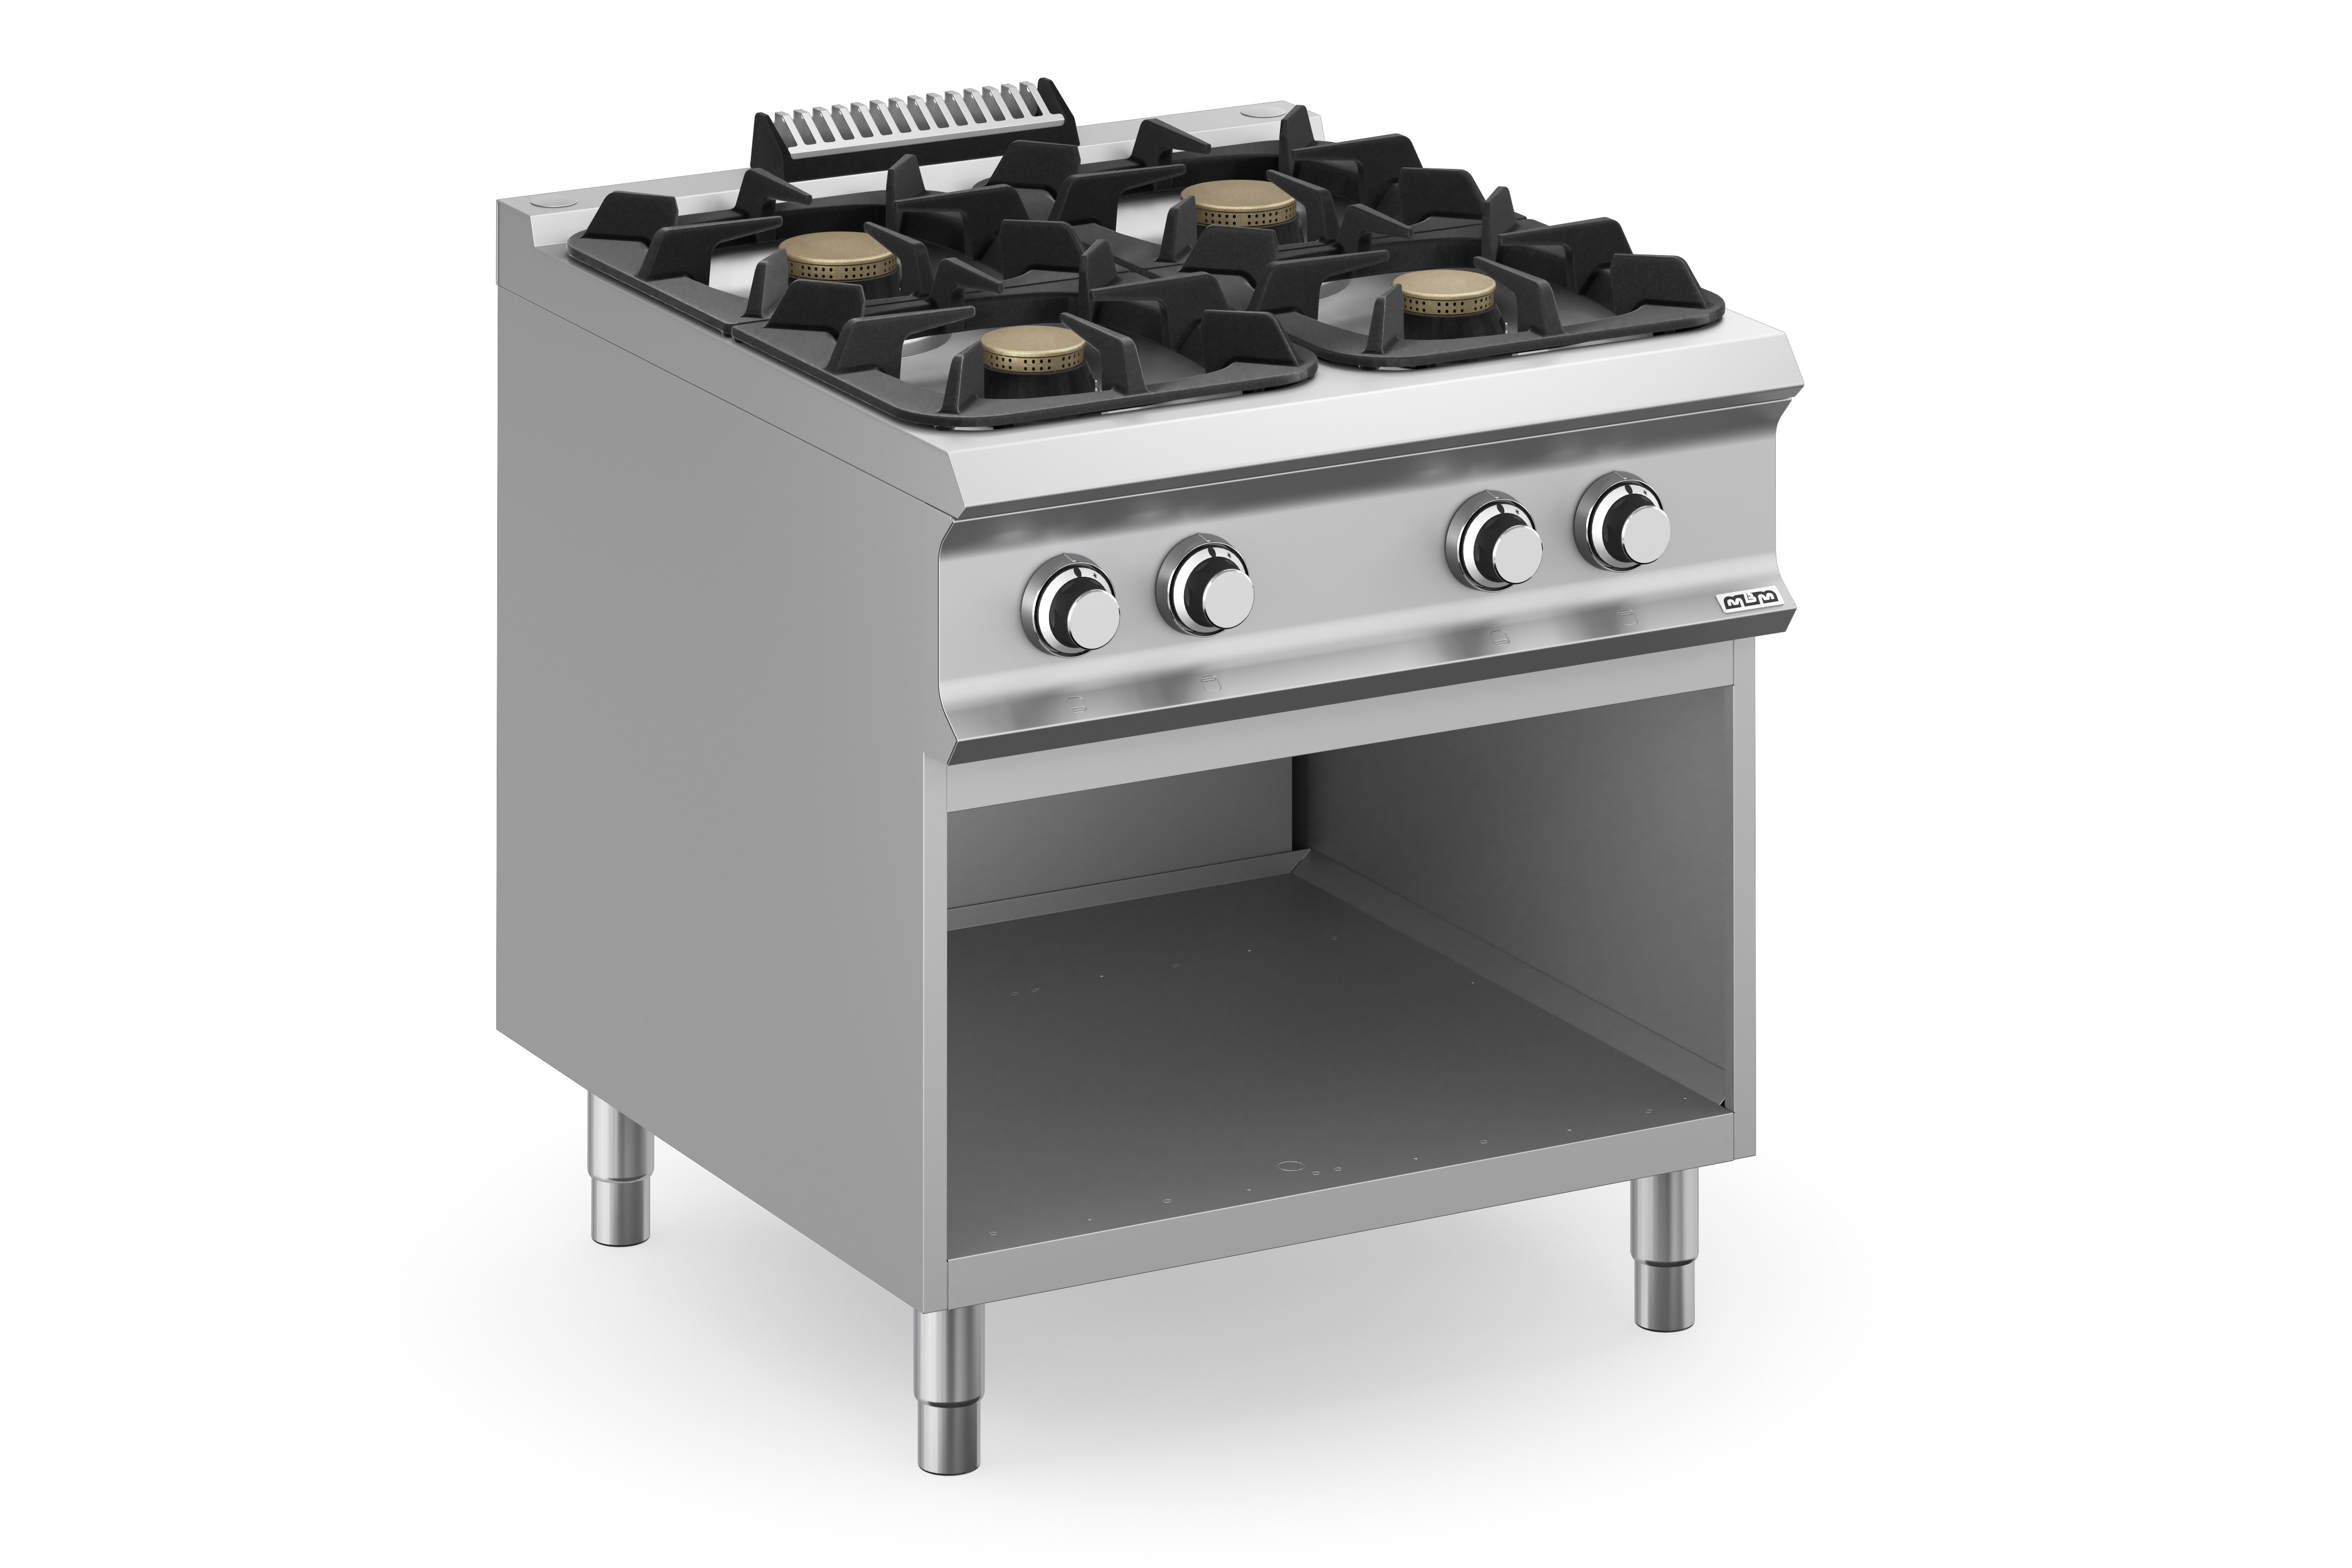 Domina Pro 900 FB98AXXL 4 Burners Gas Cooker Freestanding with Open Stand